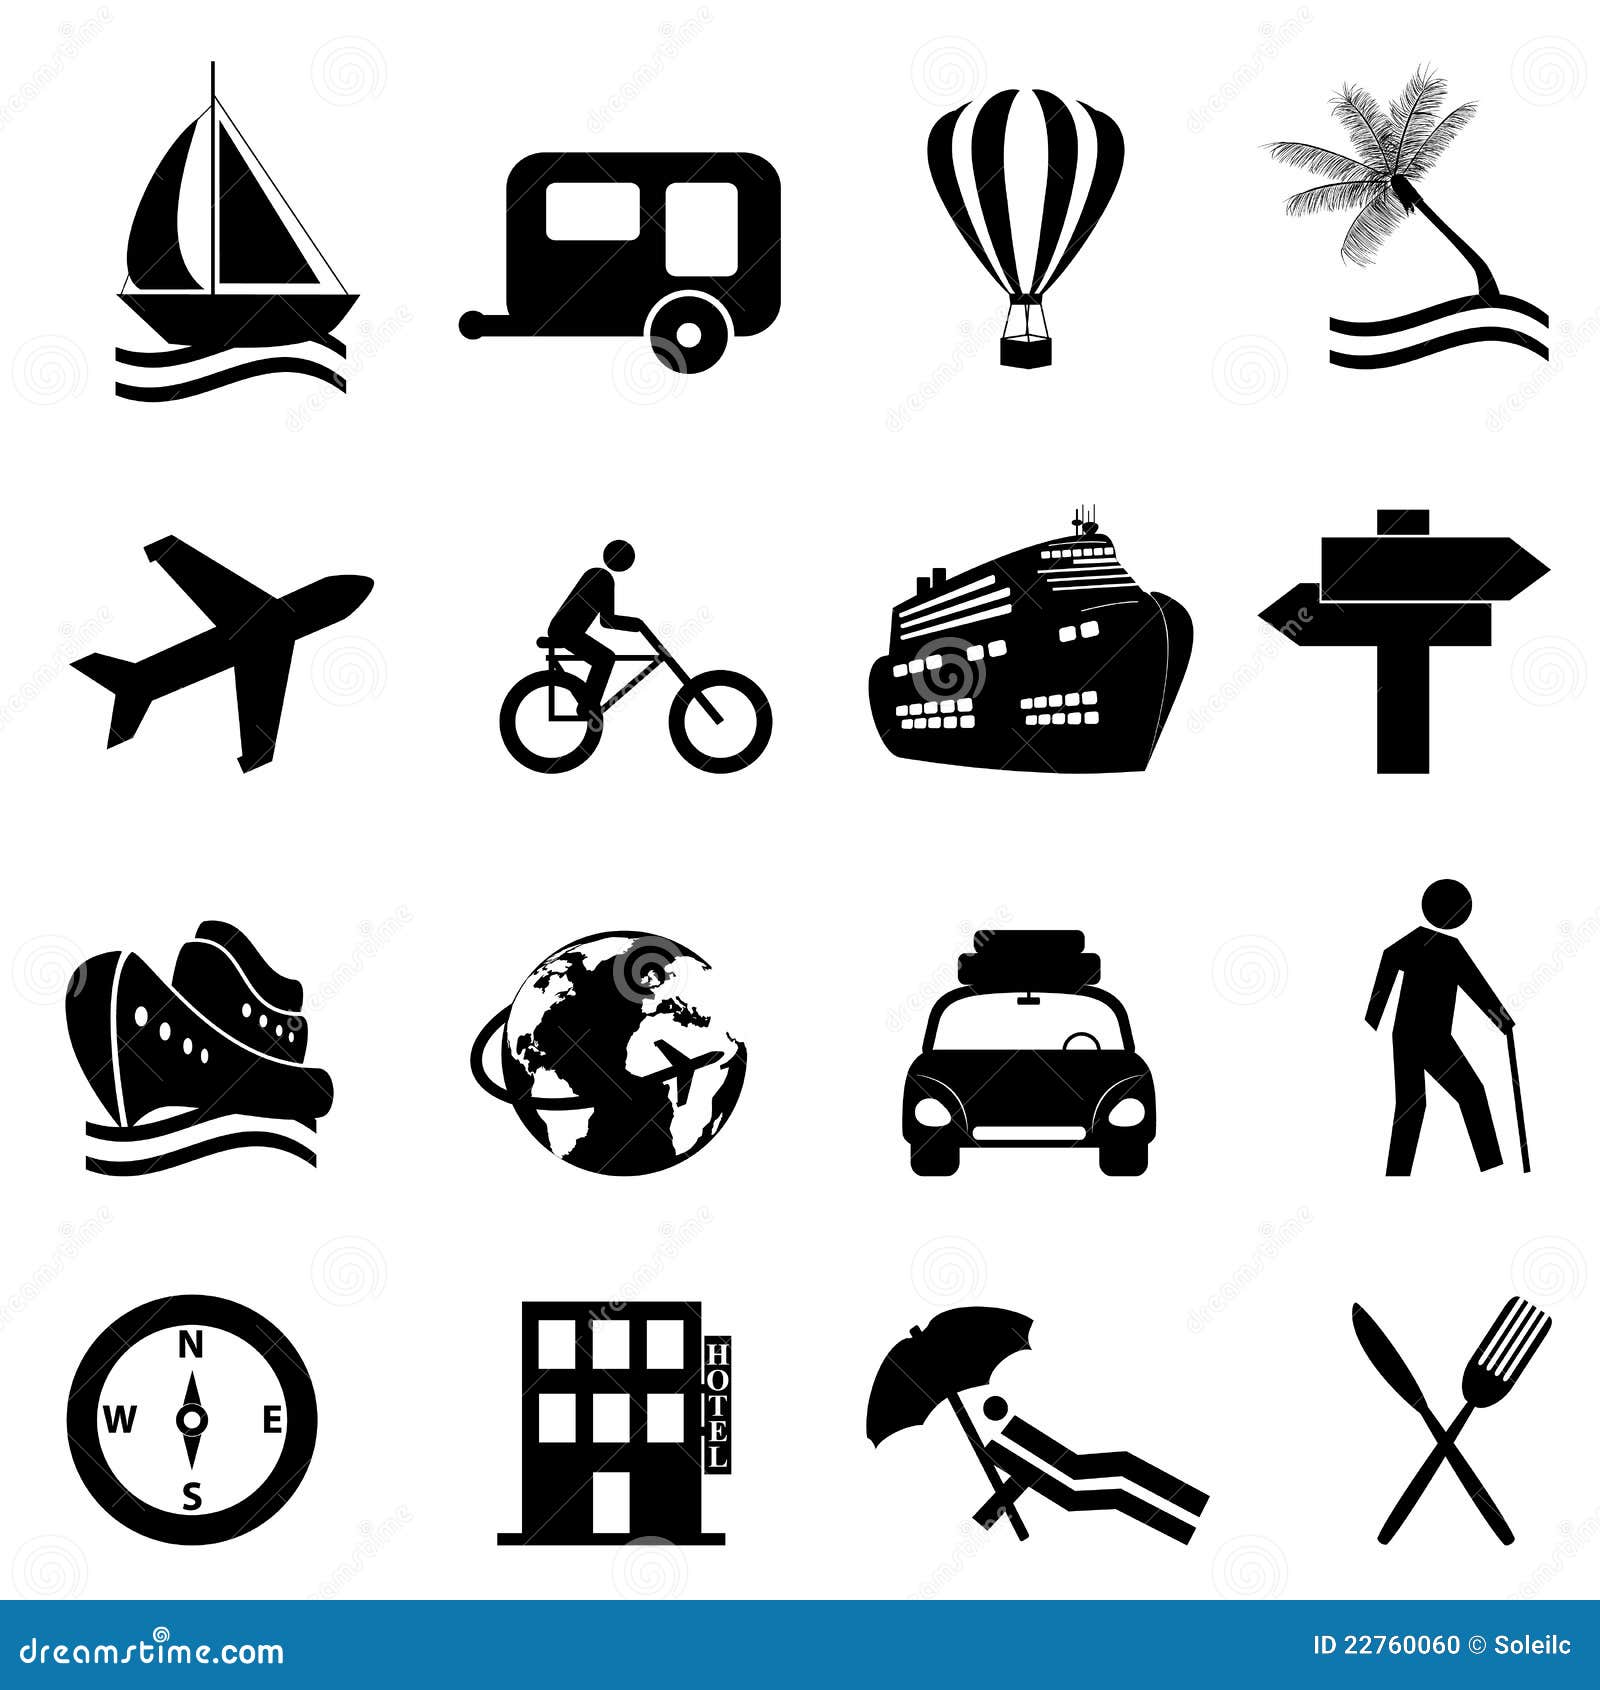 leisure, travel and recreation icon set